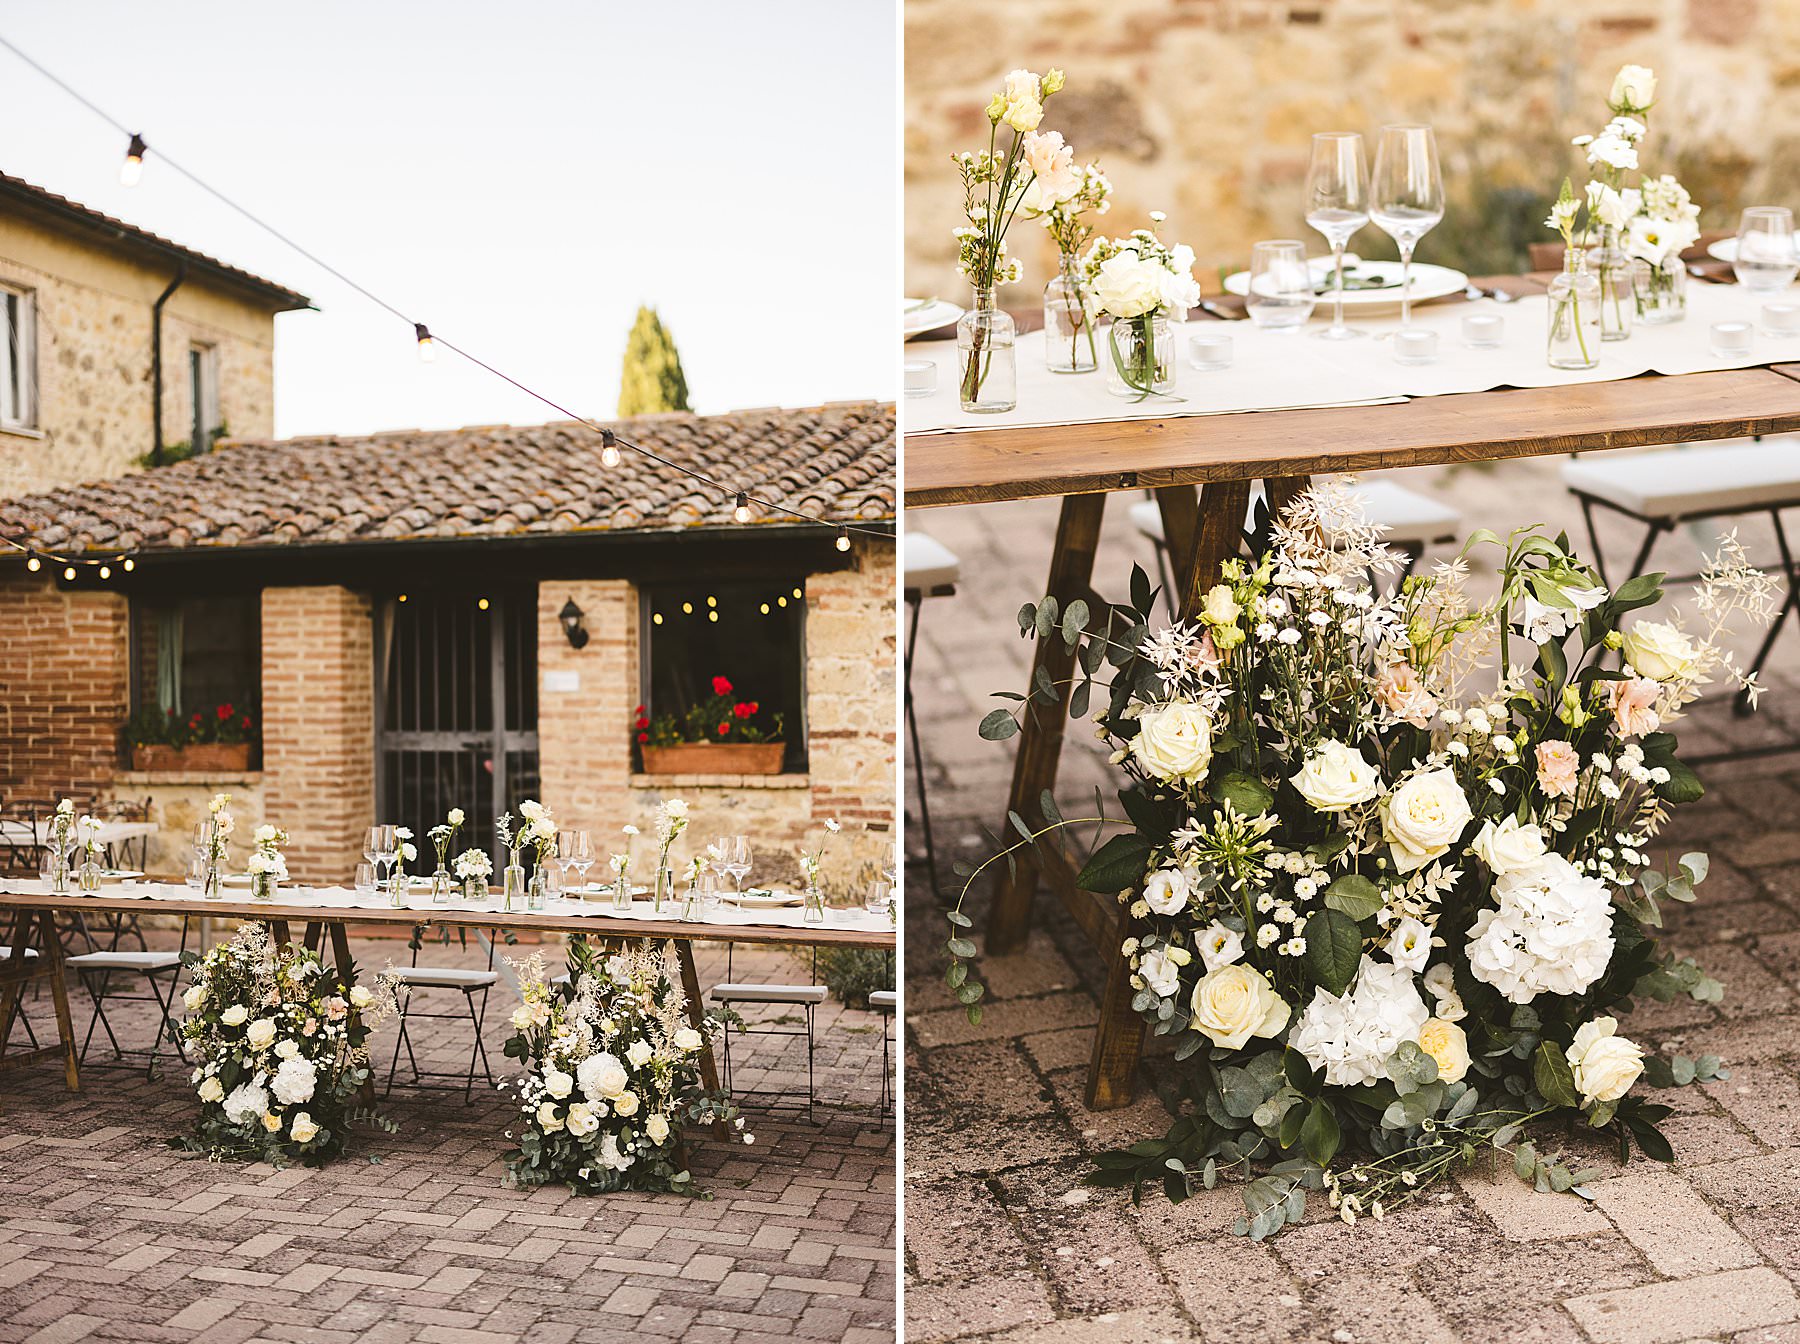 Lovely intimate wedding dinner setup decor at Tenuta di Papena estate in the countryside of Tuscany near Siena